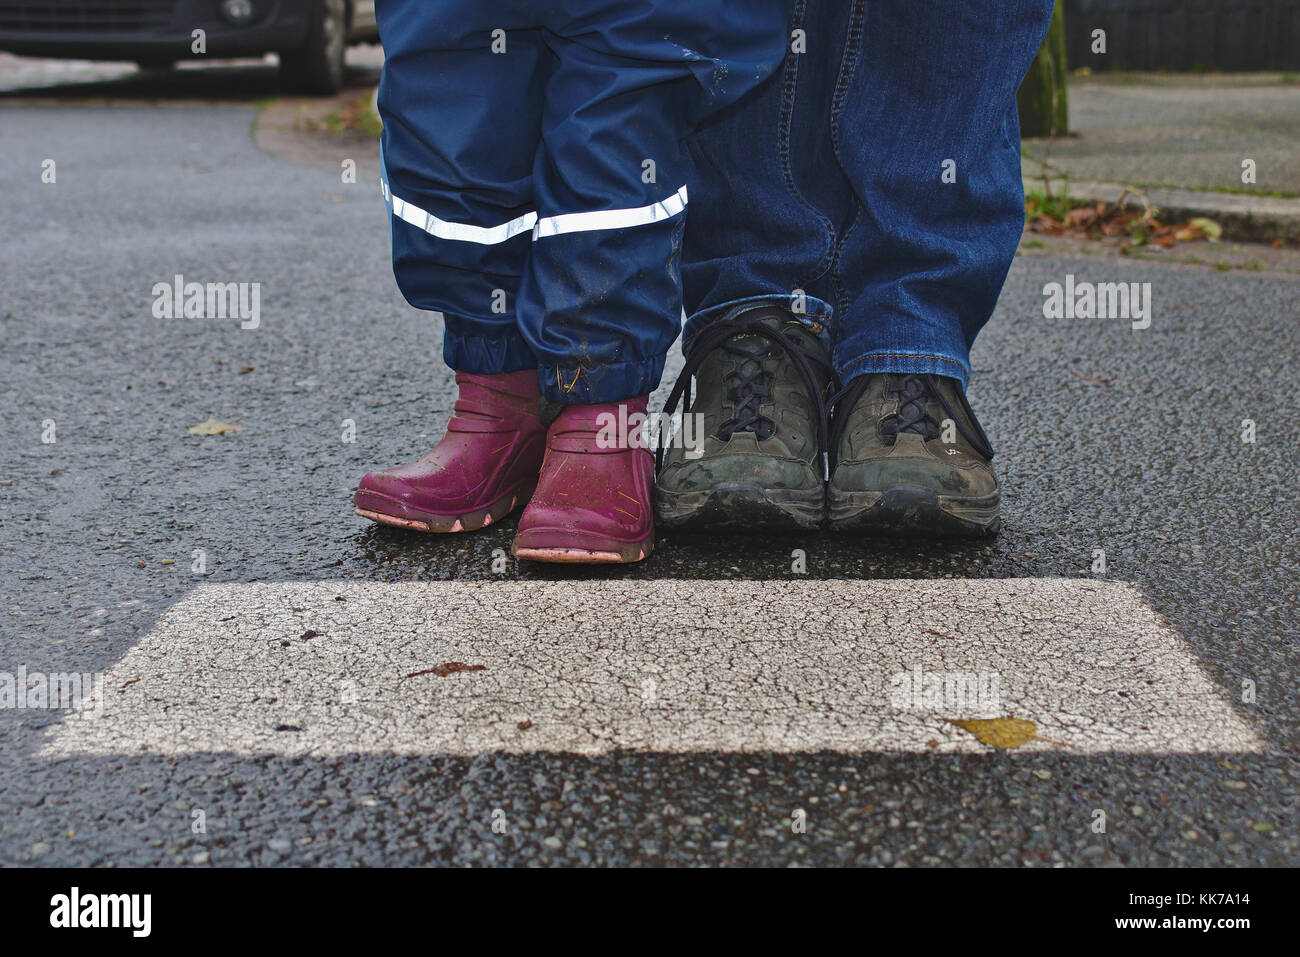 Parent wearing shoes and denim pants and child wearing rain pants and rubber boots are waiting together at the cross walk, shown from the knee down Stock Photo